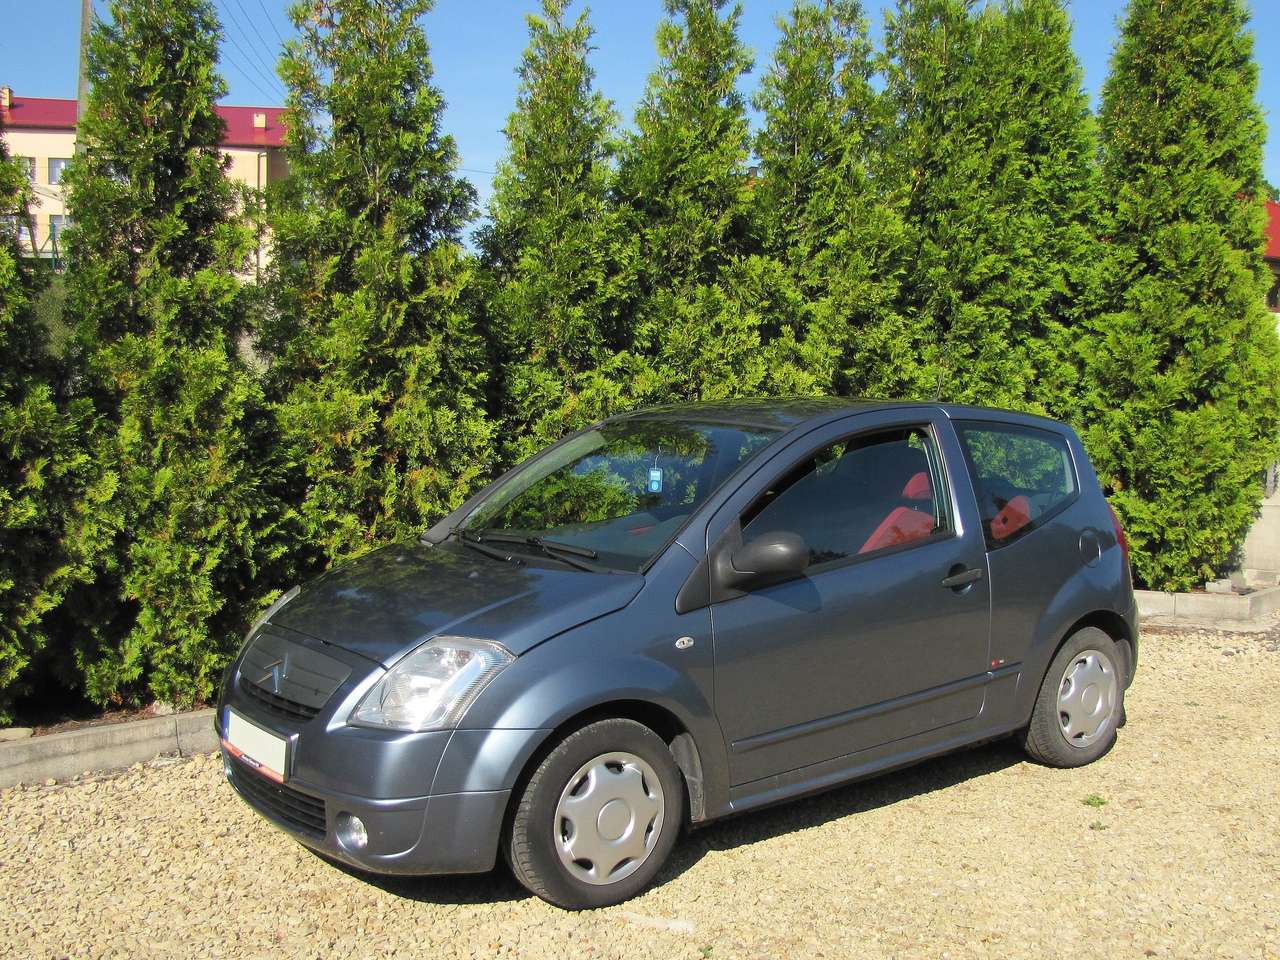 Citroen C2 puzzle online from photo